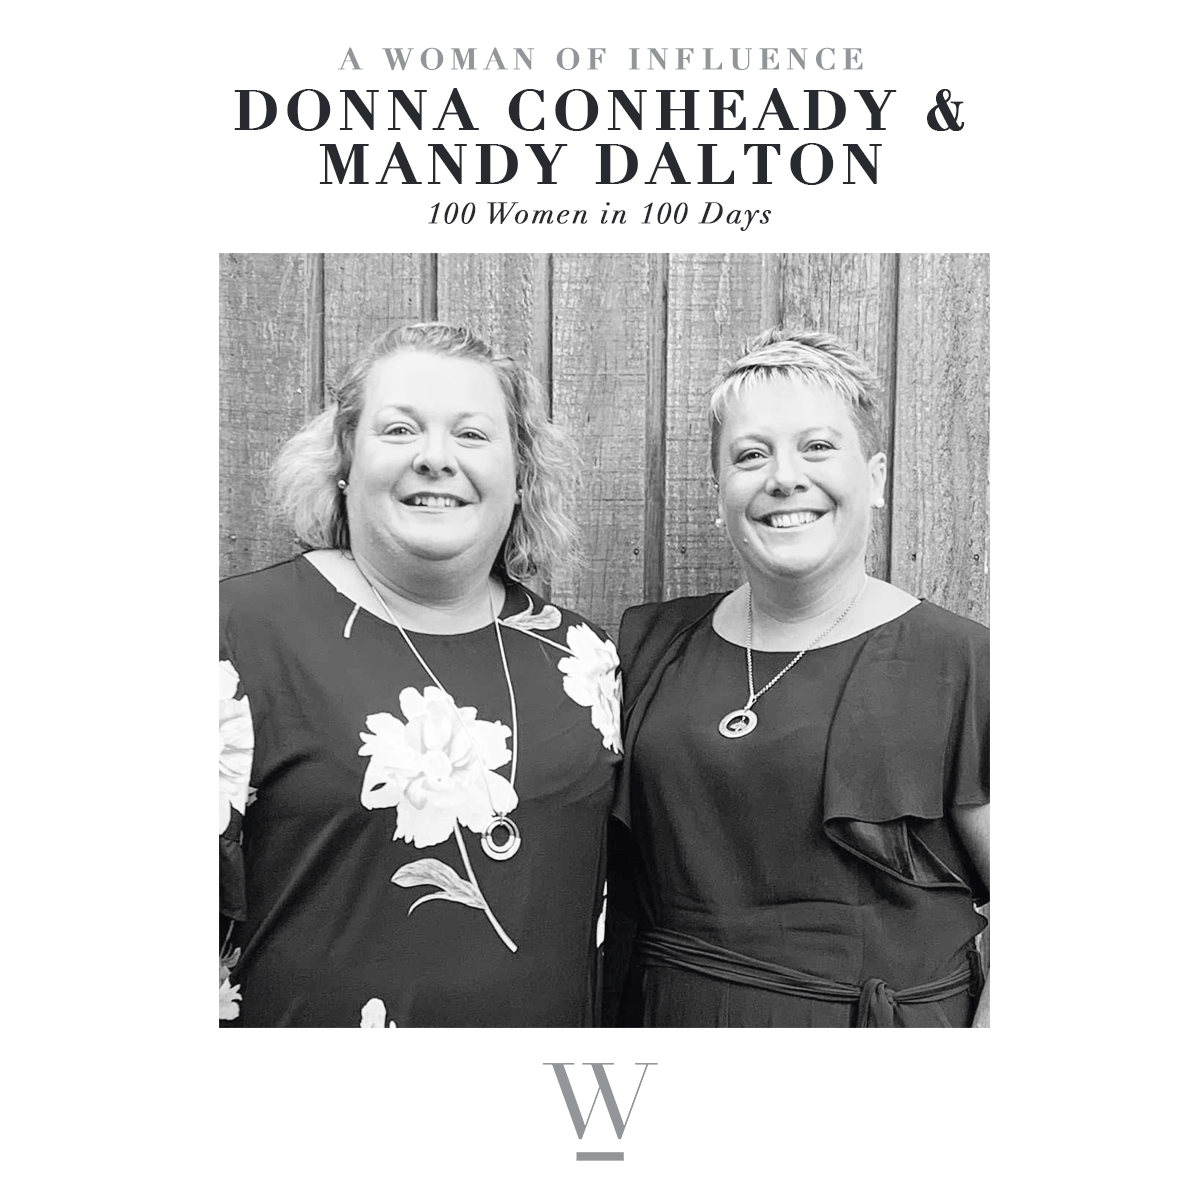 13/100 Donna Conheady & Mandy Dalton: What's it like to be a twin?